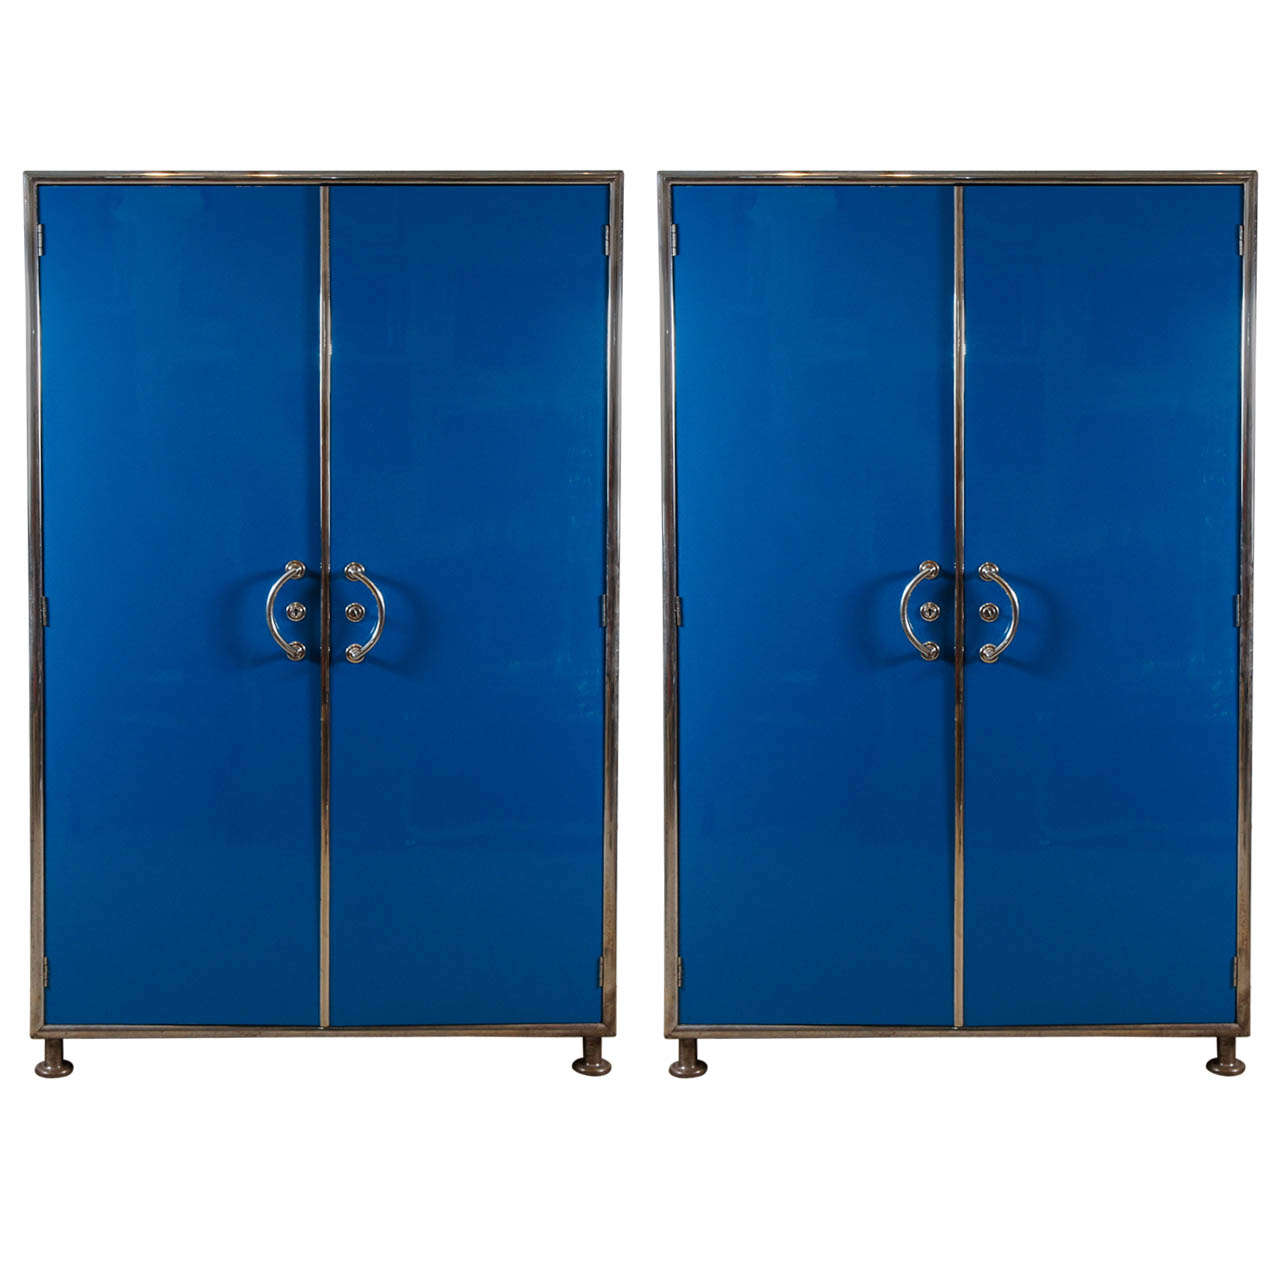 A Pair of Wardrobe Cabinets by Rudolf Vichr